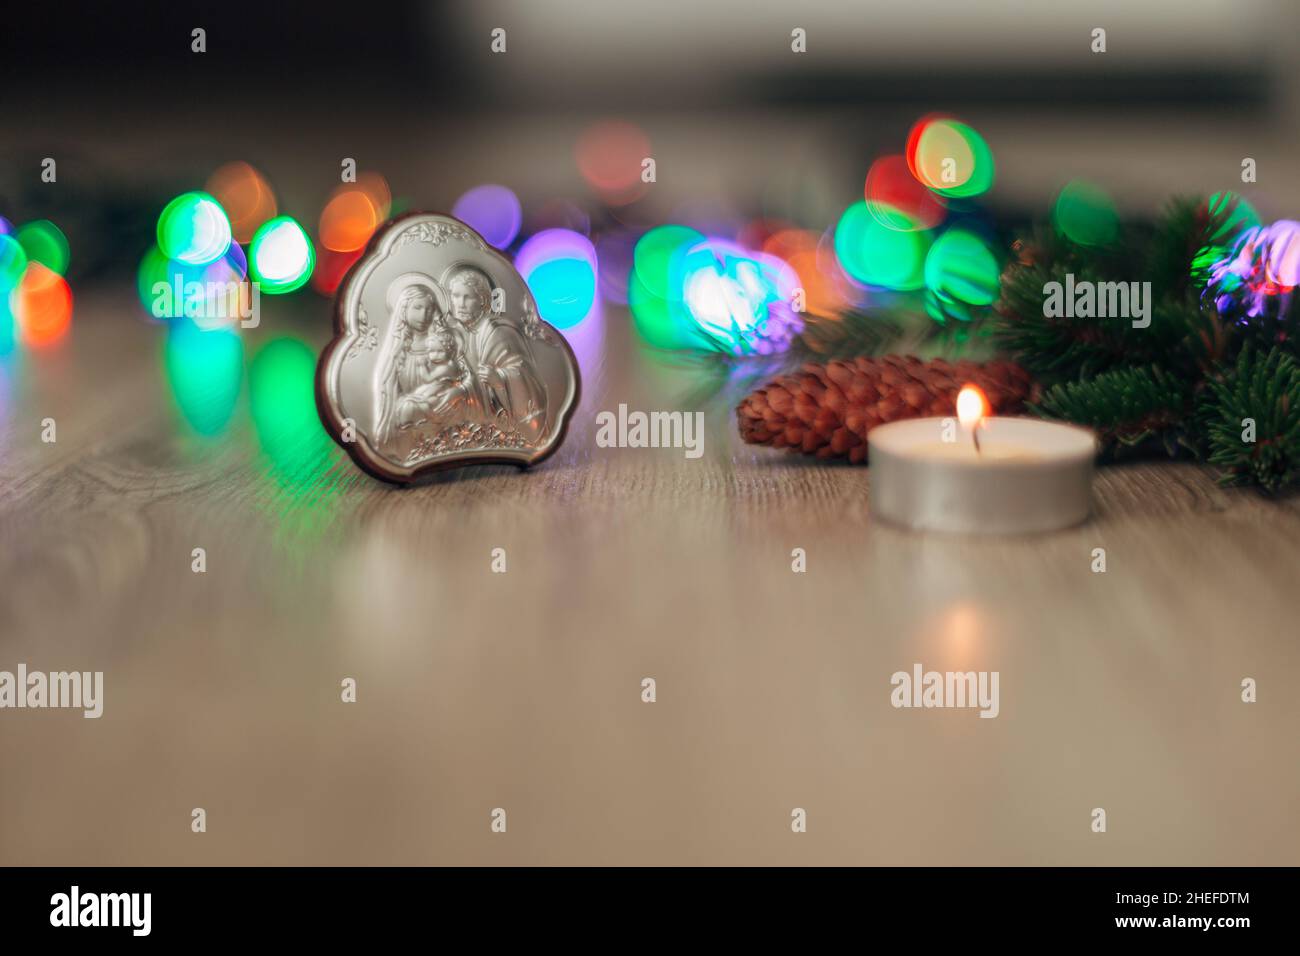 Christmas Composition of Church Icon on a Wooden Background With Multicolored Boken Stockfoto